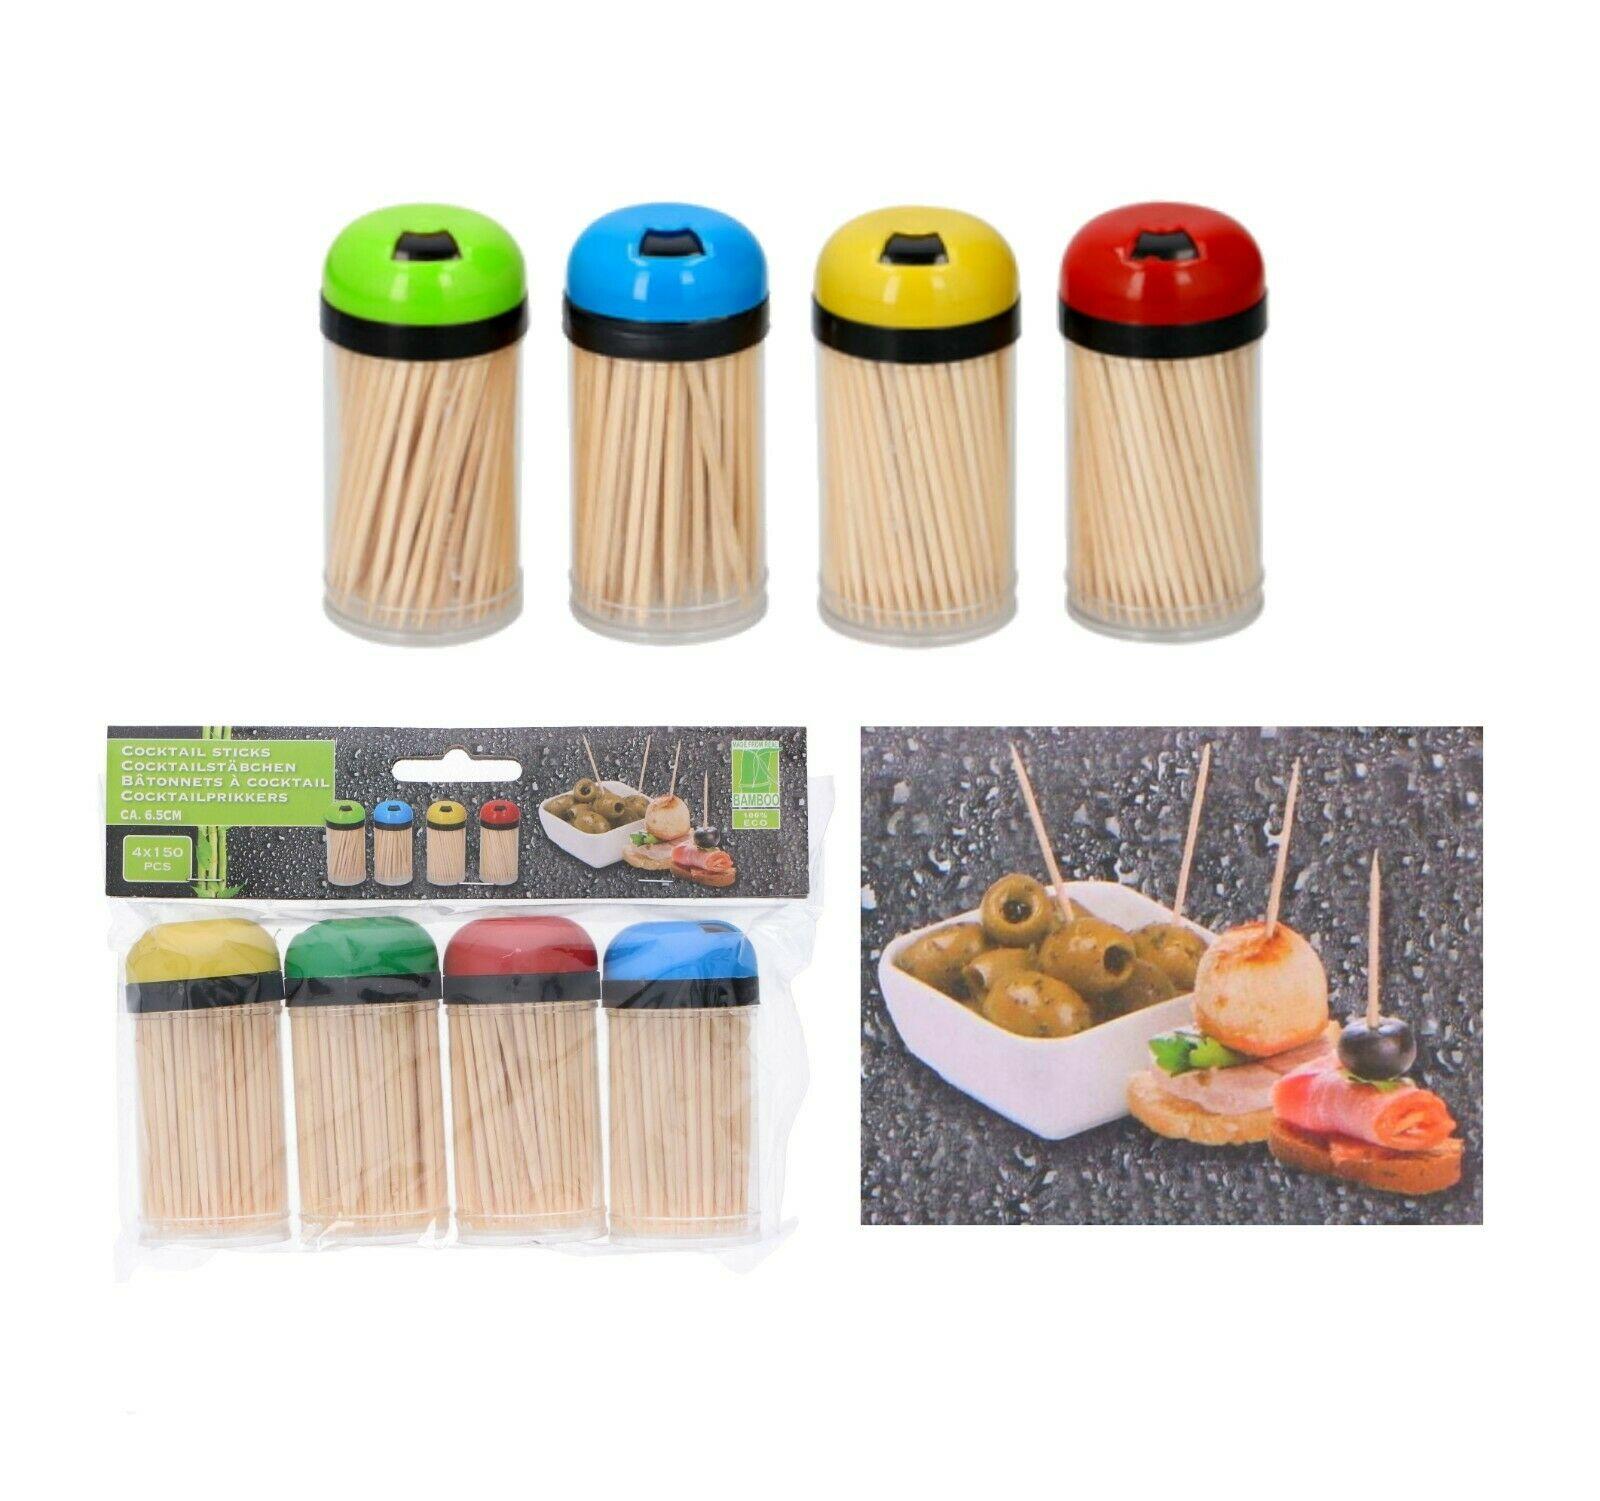 Details about   600x WOODEN COCKTAIL STICKS Toothpicks/Bamboo Skewers Olives/Party Food Picks 